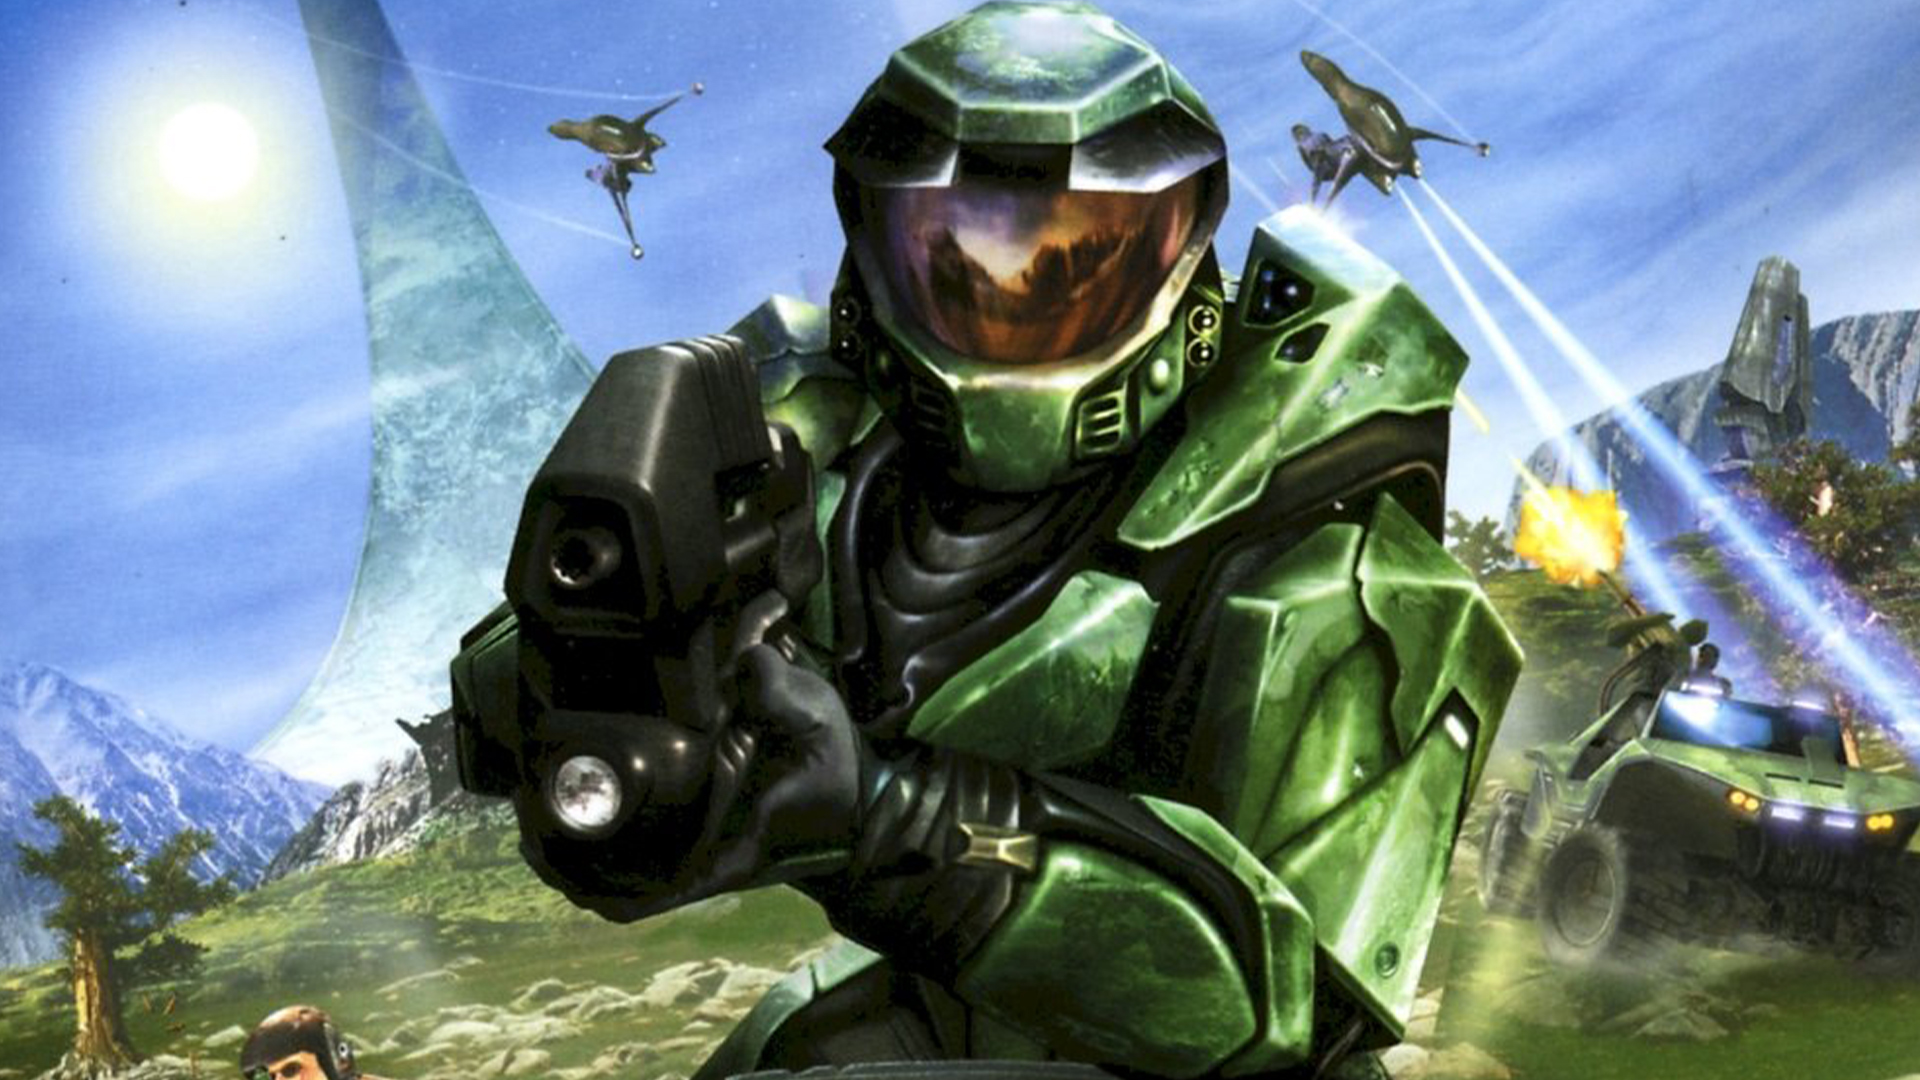 Halo: Combat Evolved' remaster for PC enters public testing in January